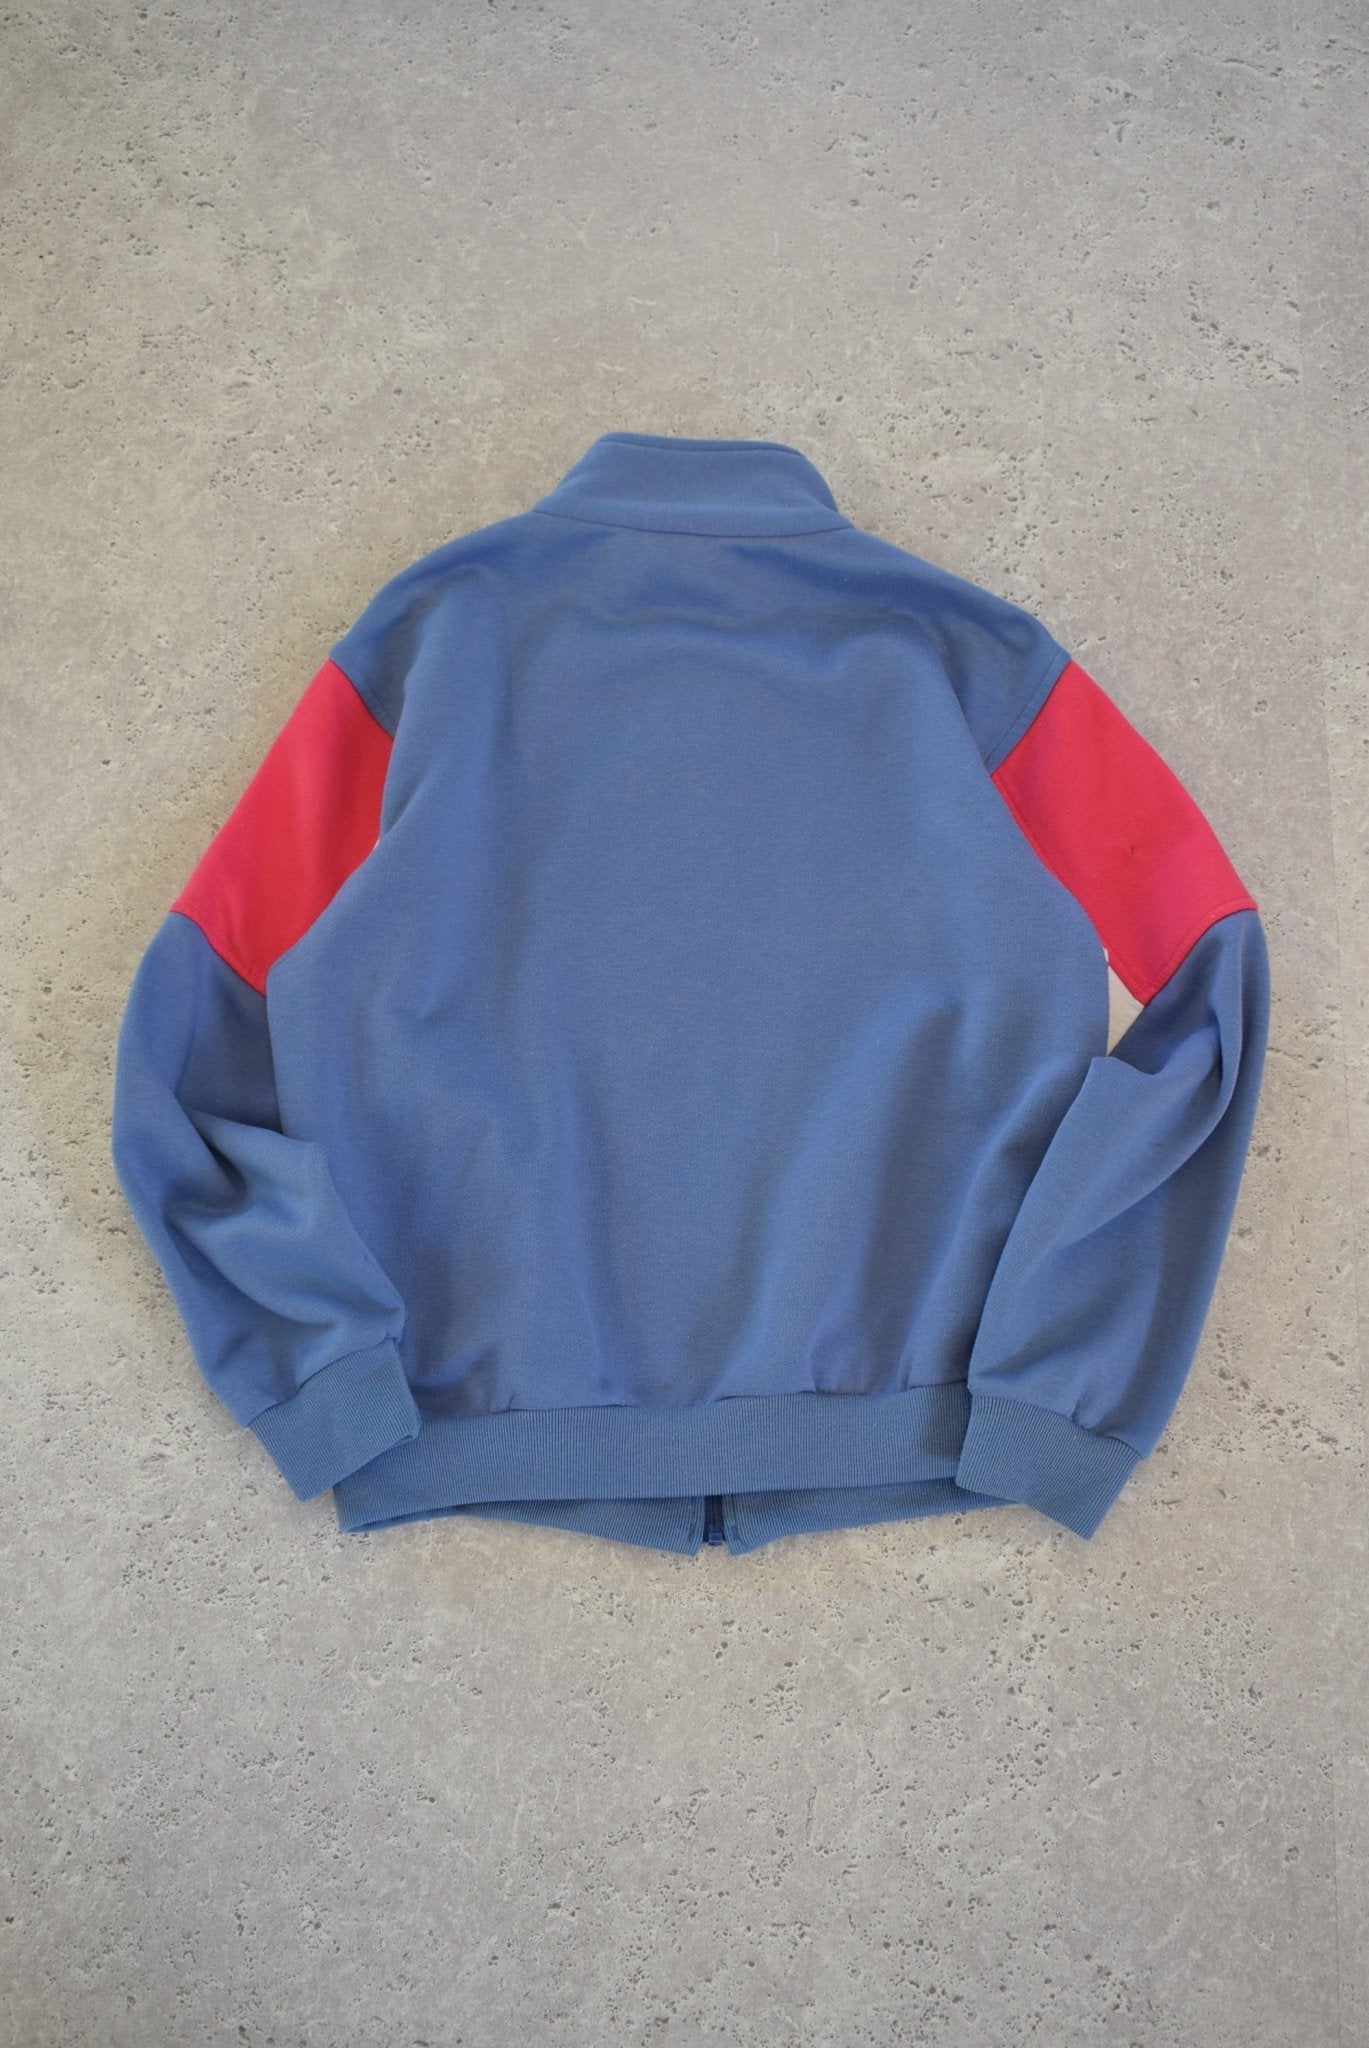 Vintage 90s Adidas Embroidered Fill Zip Sweater (S) - Retrospective Store